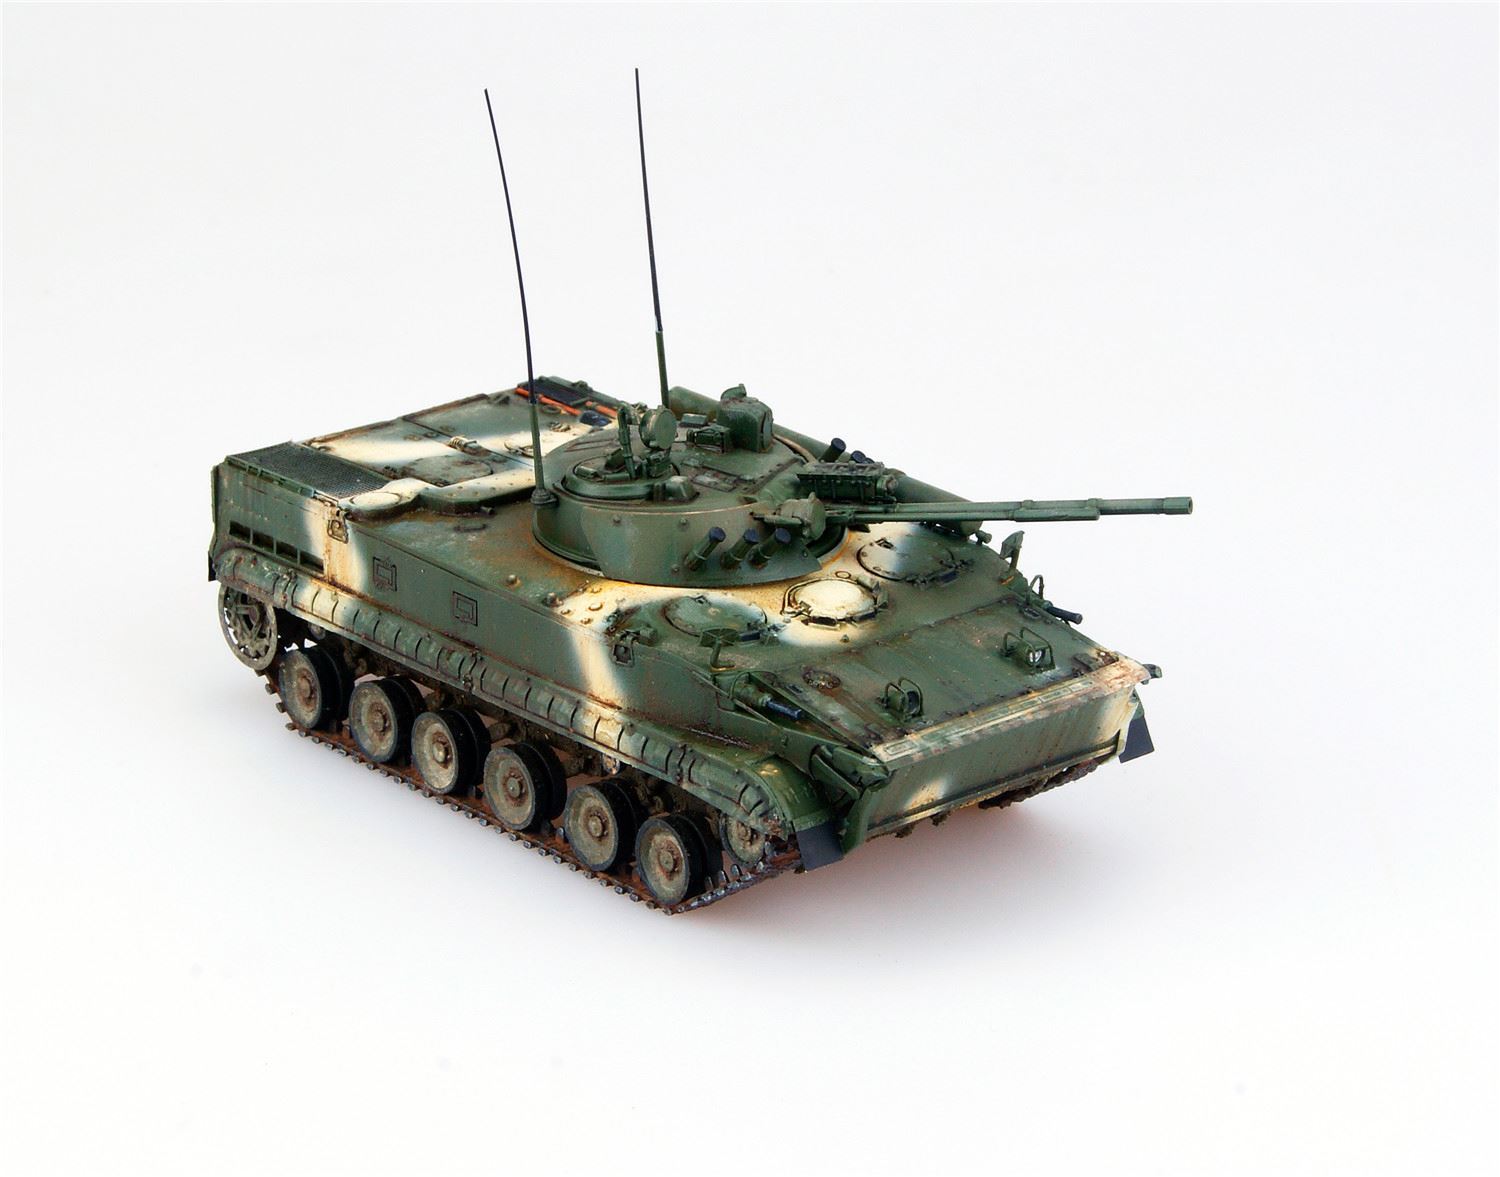 Modelcollect UA72035 BMP3 Infantry Fighting Vehicle Middle Ver